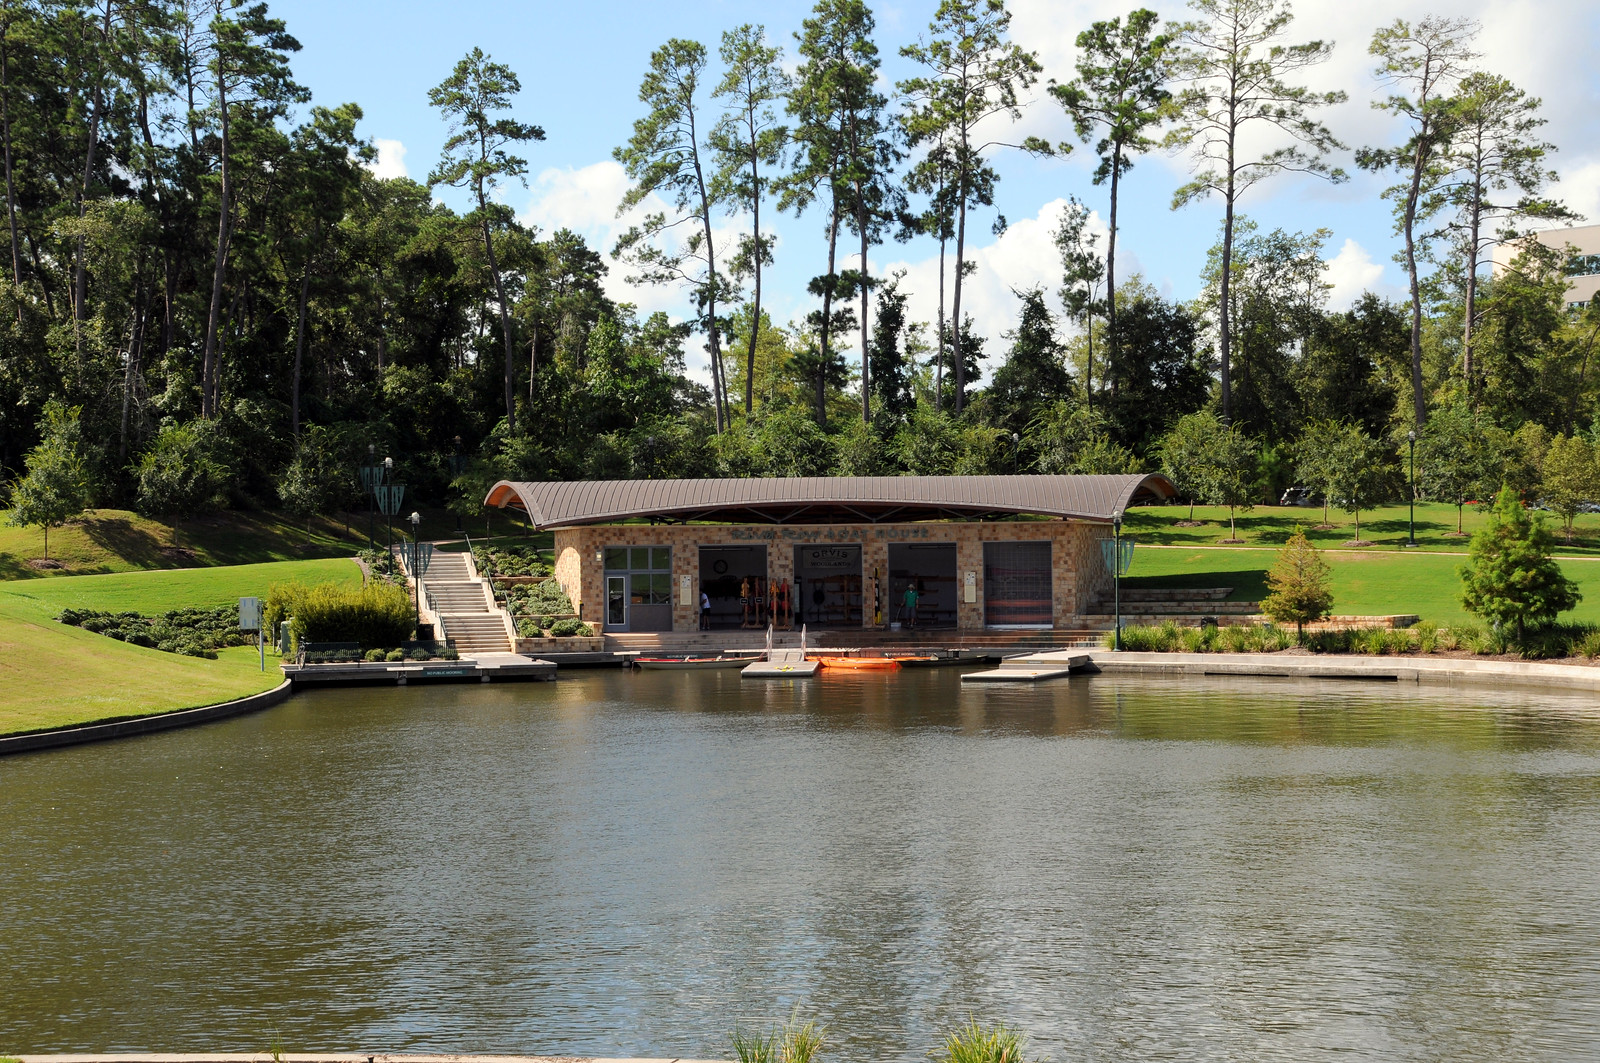 Riva Row Boat House The Woodlands Master Planned Community Houston Texas Suburb Architecture Waterway Plaza Canal Fountain Water Taxi Boats Lifestyle Photographer DSC_4267